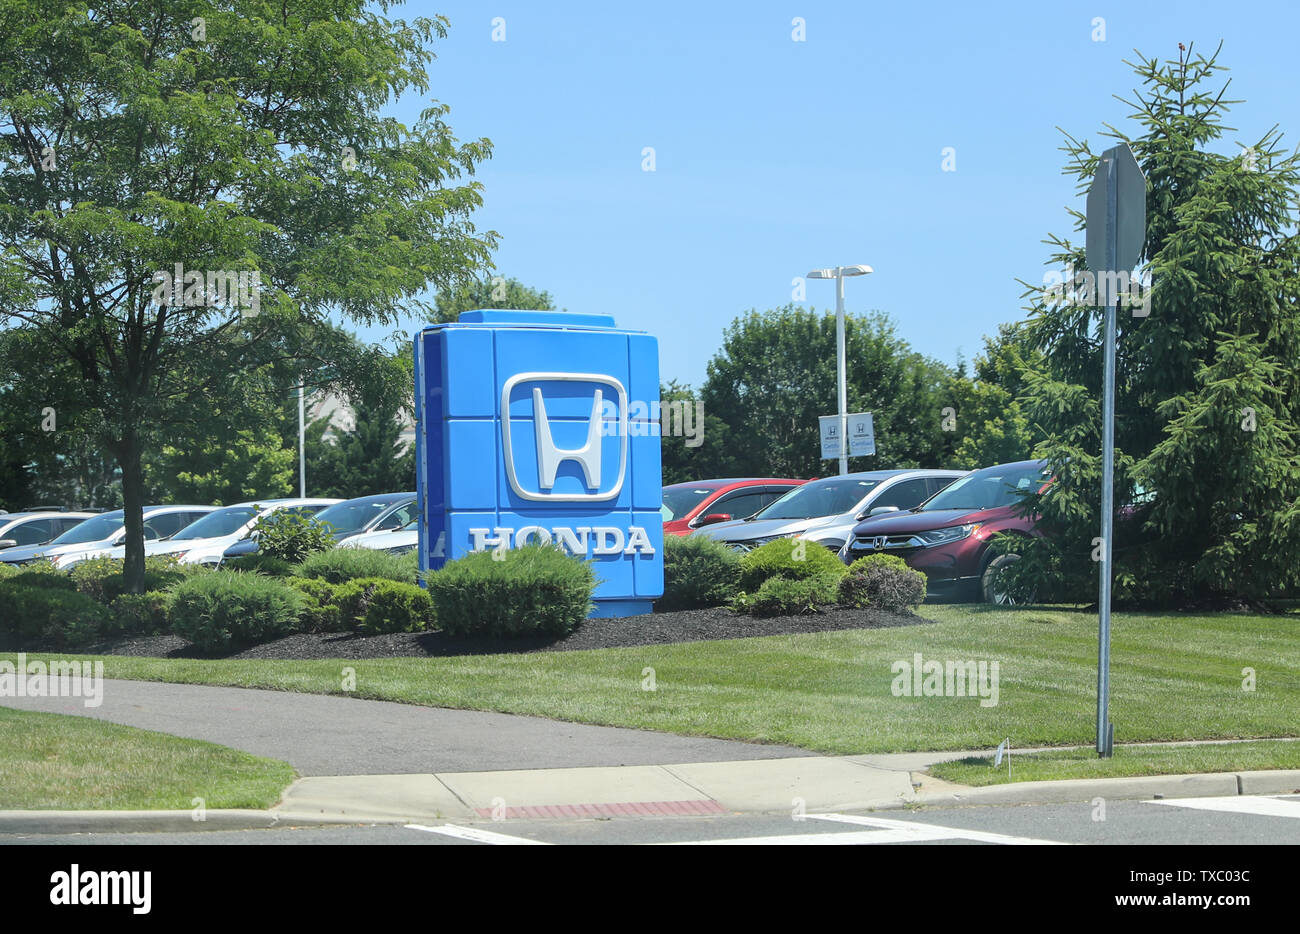 Princeton New Jersey - June 23, 2019:Honda store front. Logo and Sign. Honda Manufactures Among the Most Reliable Cars in the World VI - Image Stock Photo